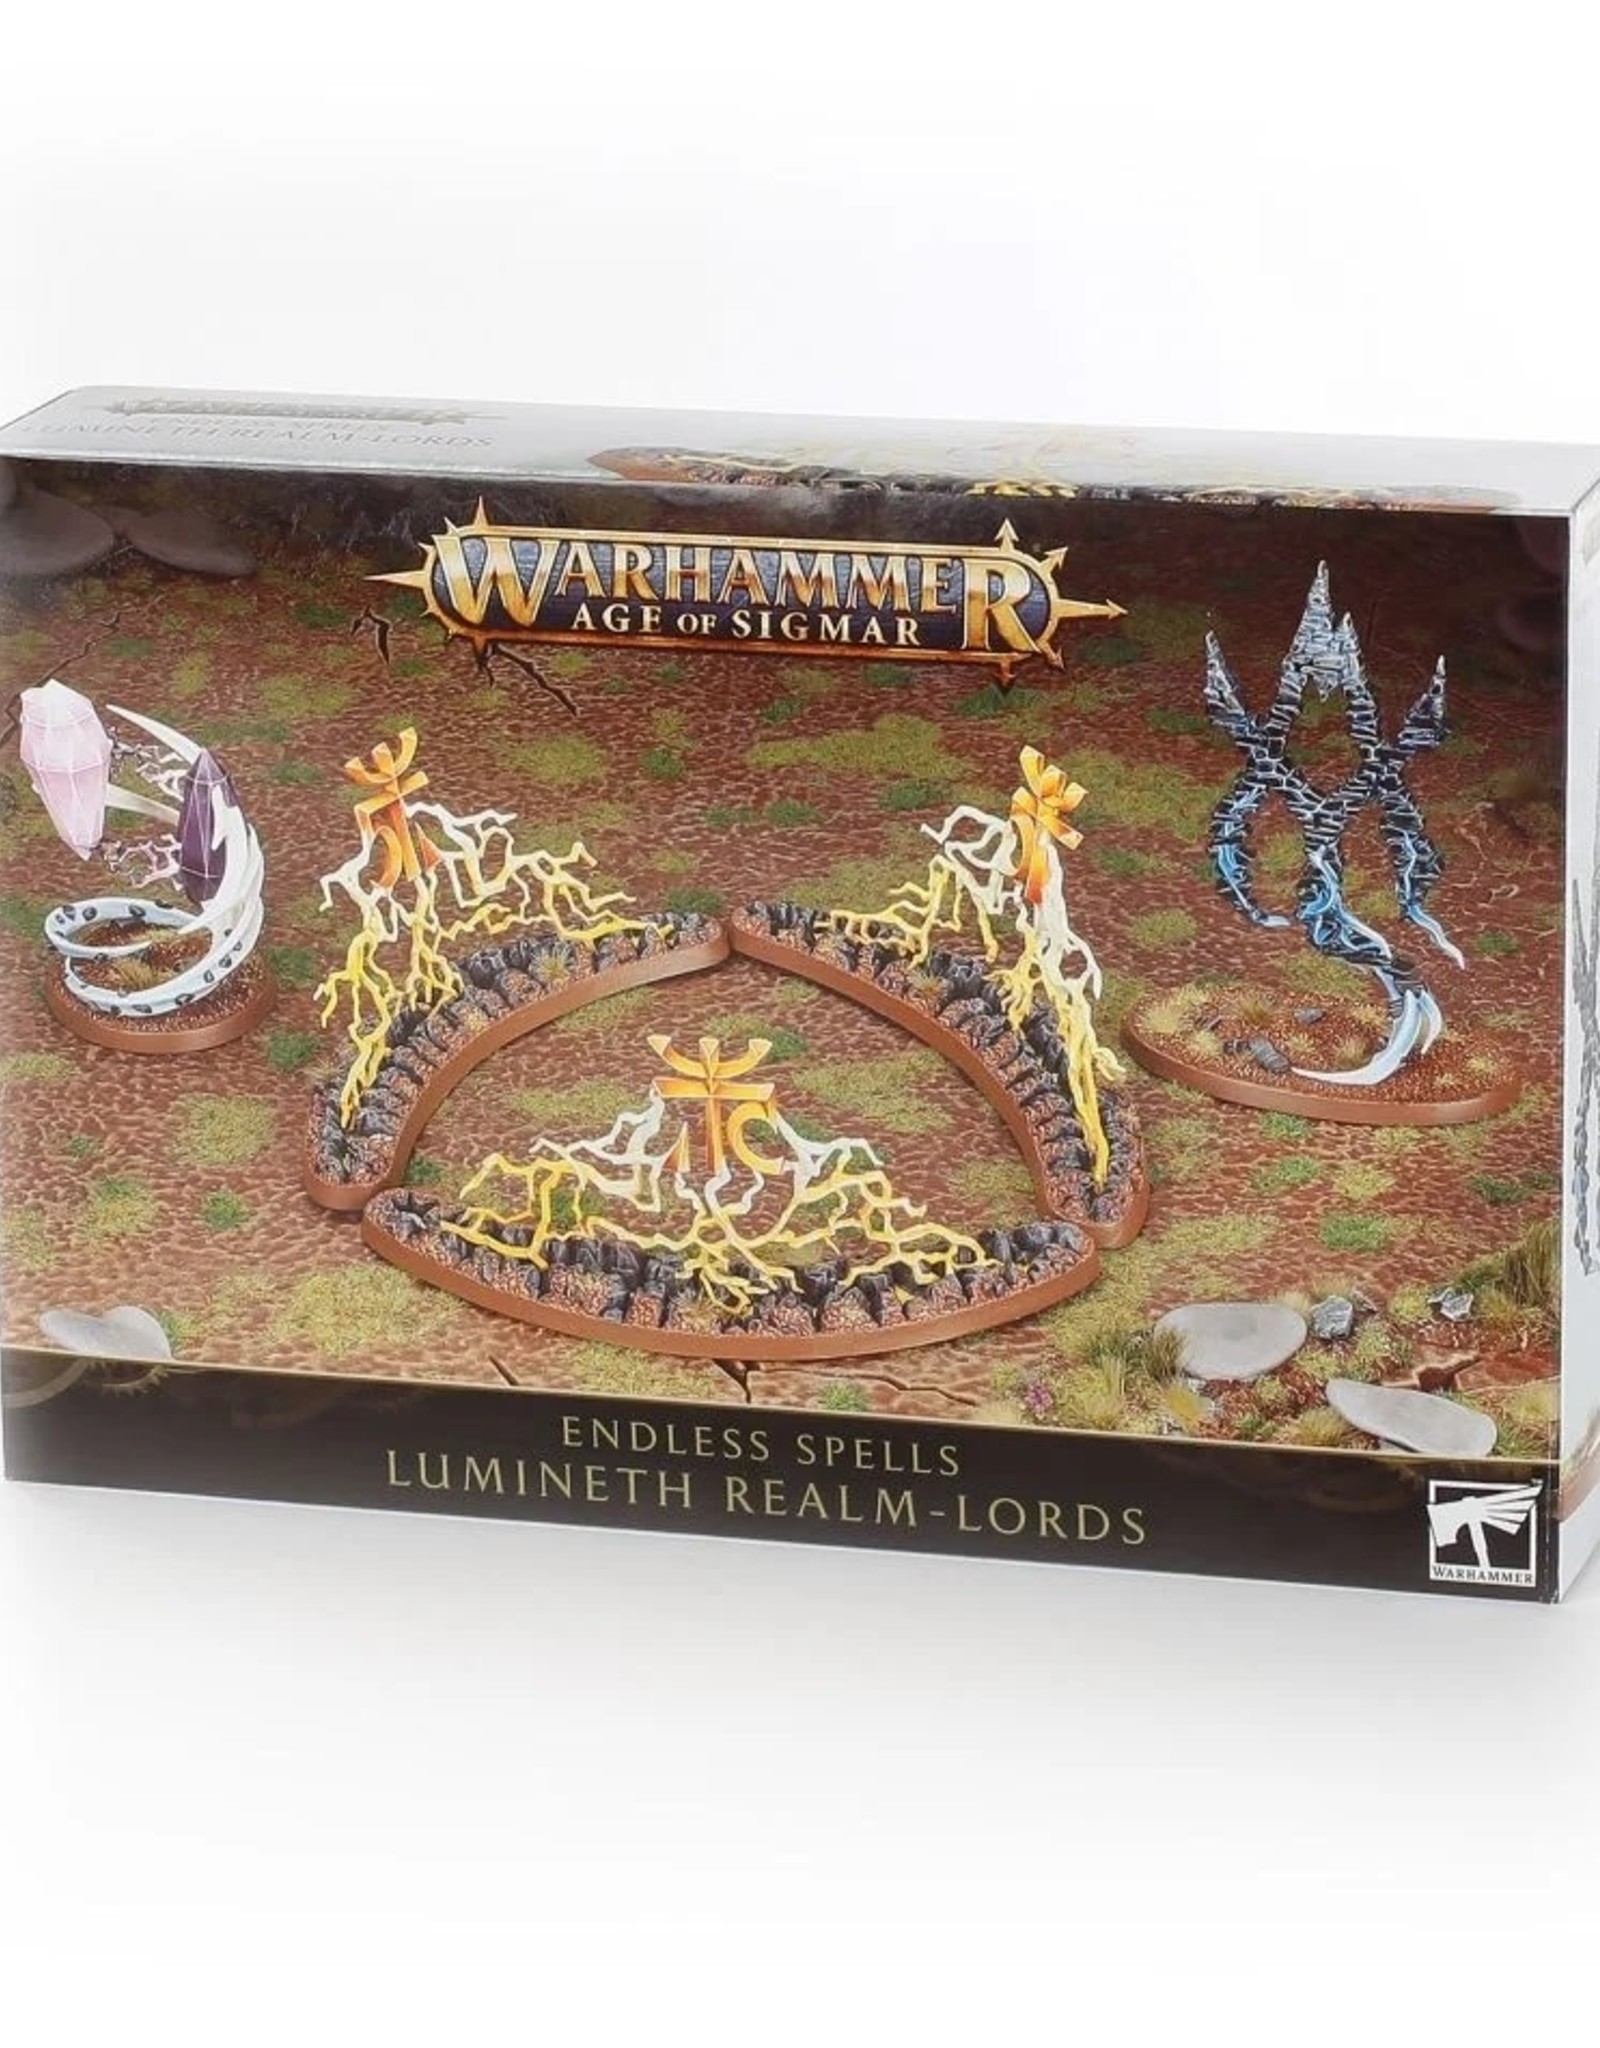 Games Workshop Age of Sigmar: Endless Spells Lumineth Realm-Lords